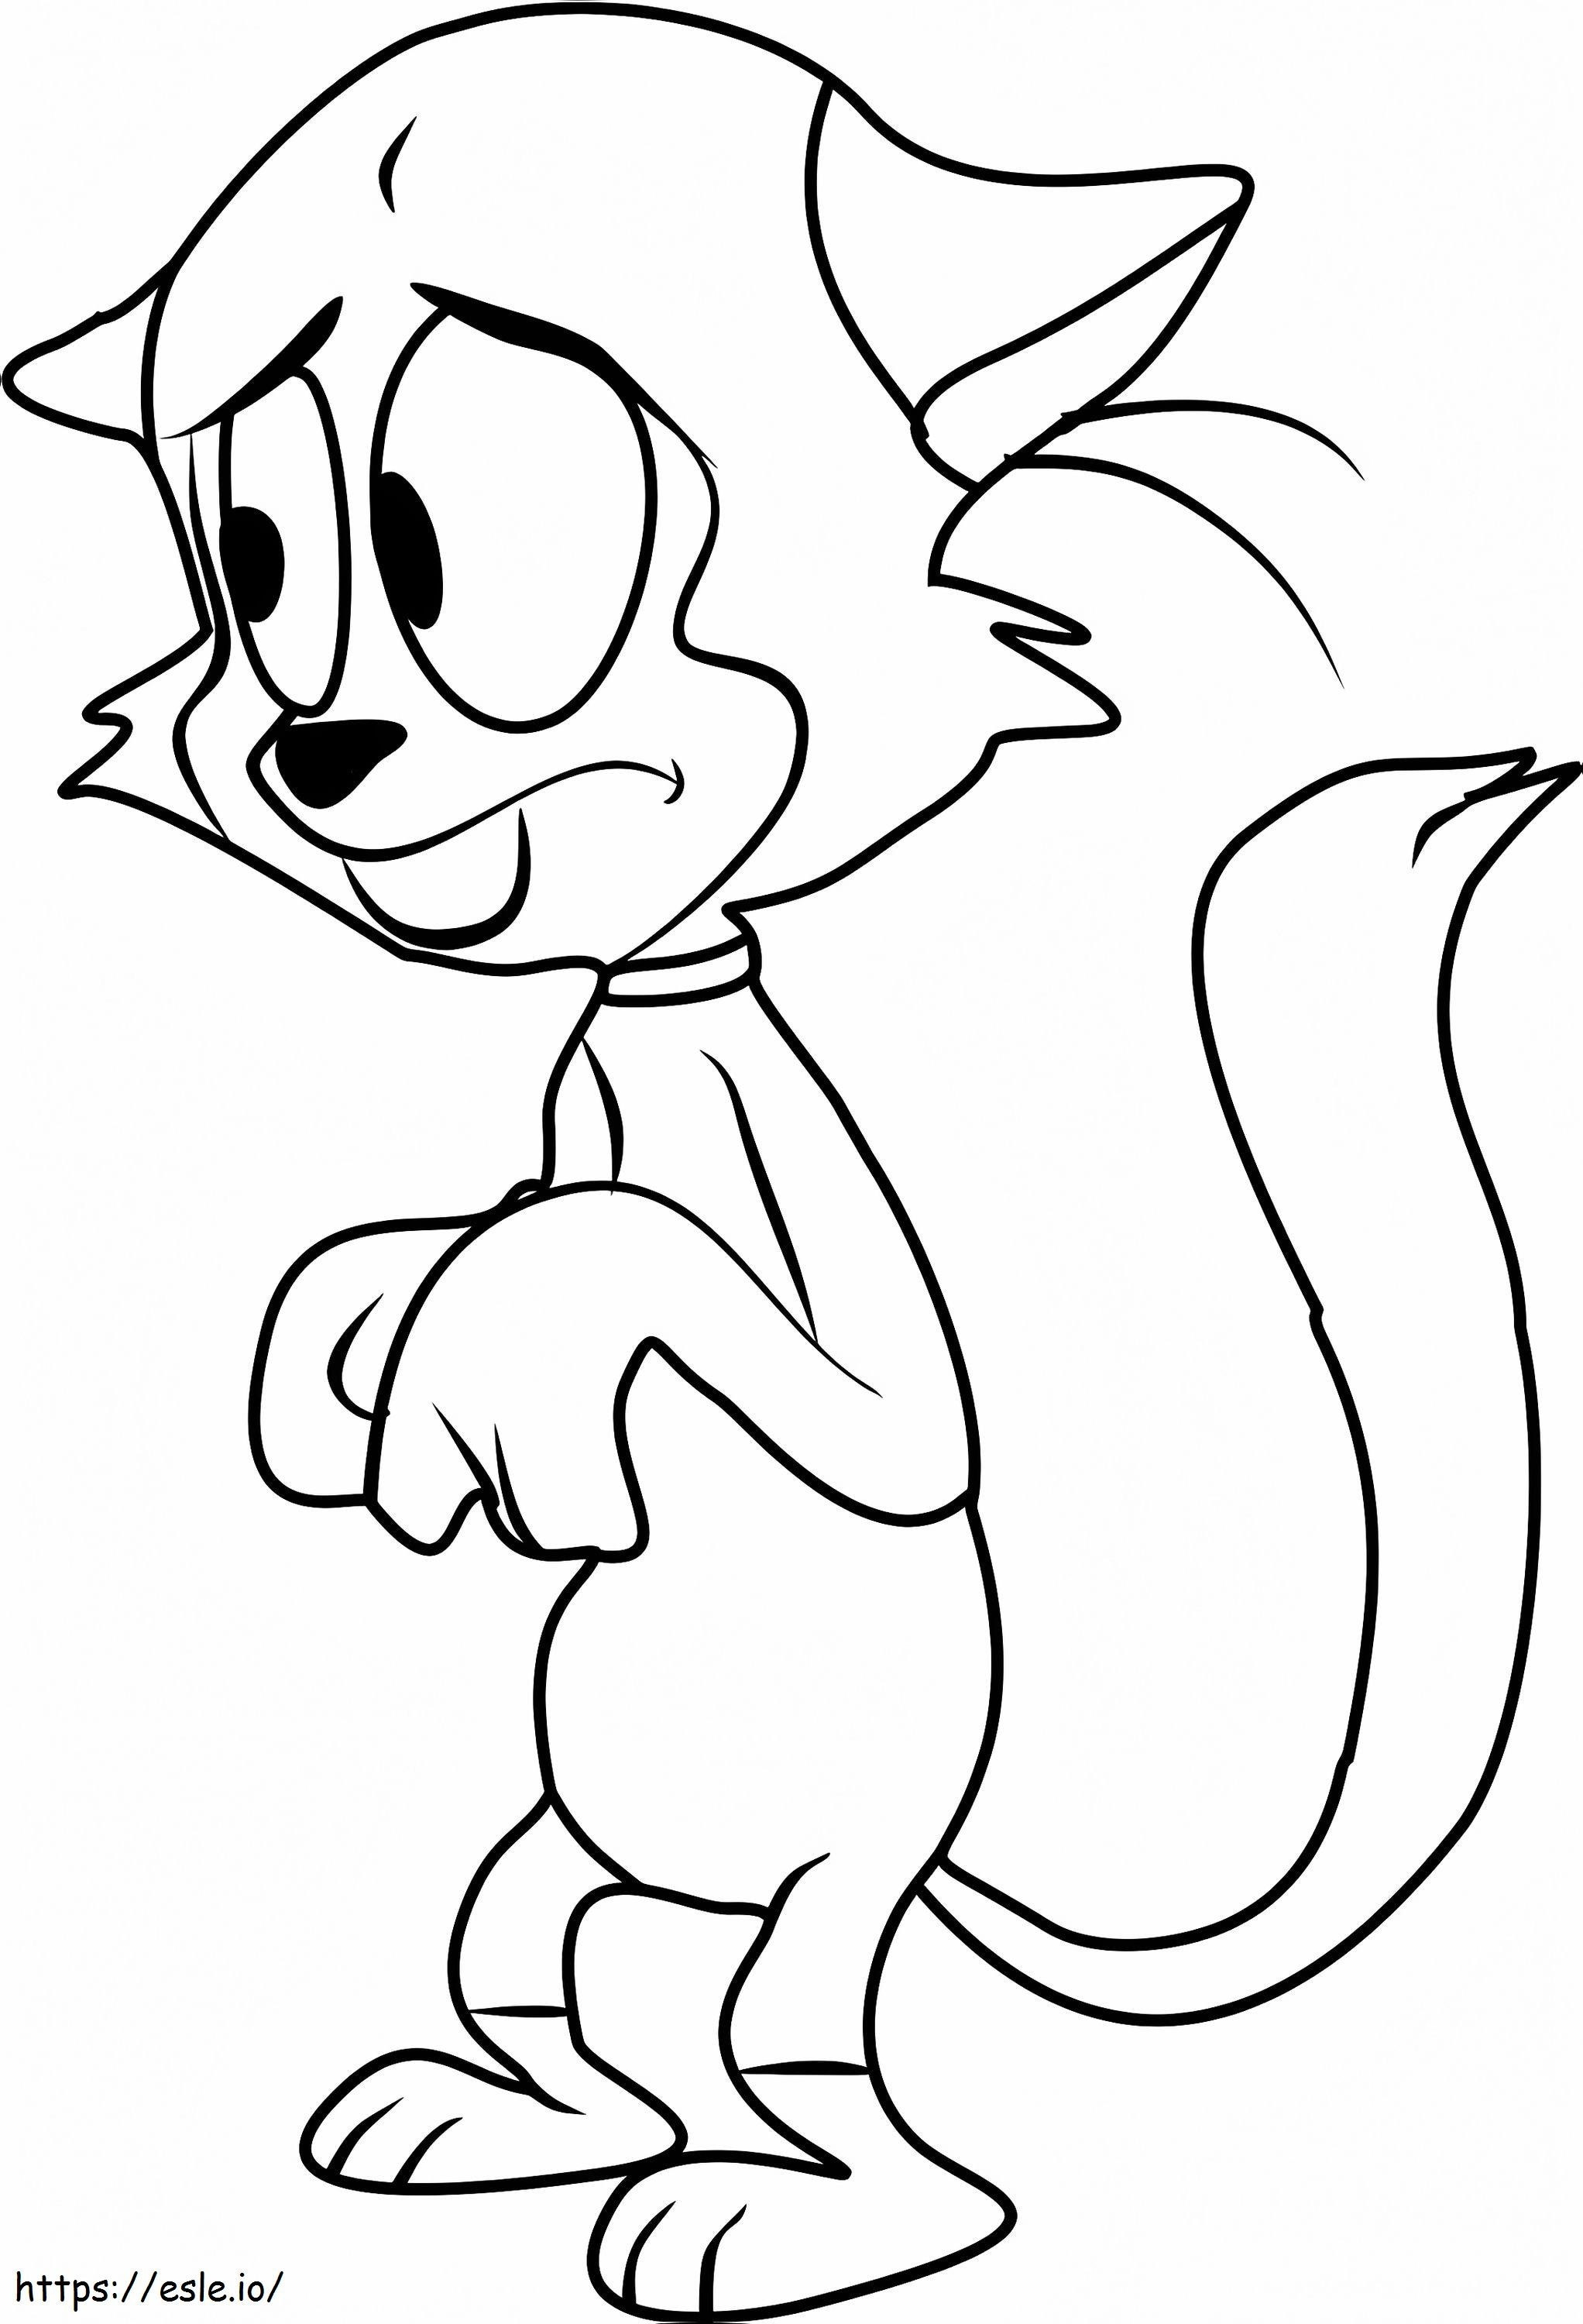 1530849485 Chester The Cata4 coloring page